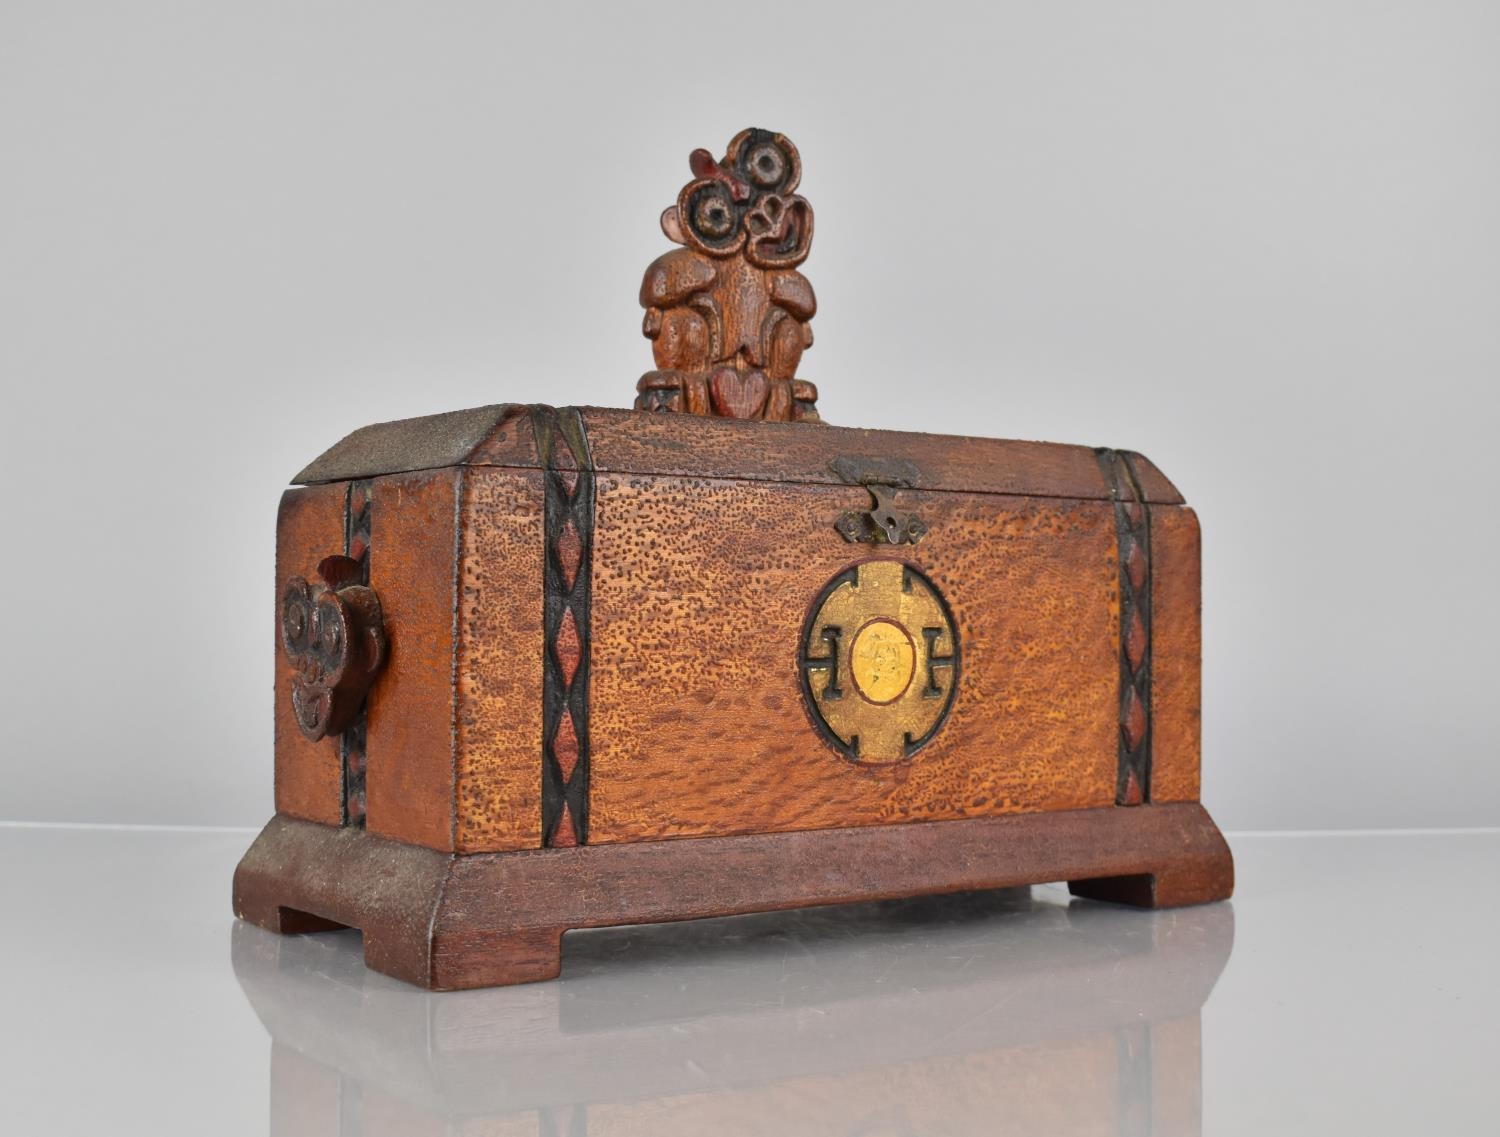 An Early 20th Century New Zealand Maori Carved Wooden Box, Top Decorated with a Carved Hei-Tiki - Image 2 of 6